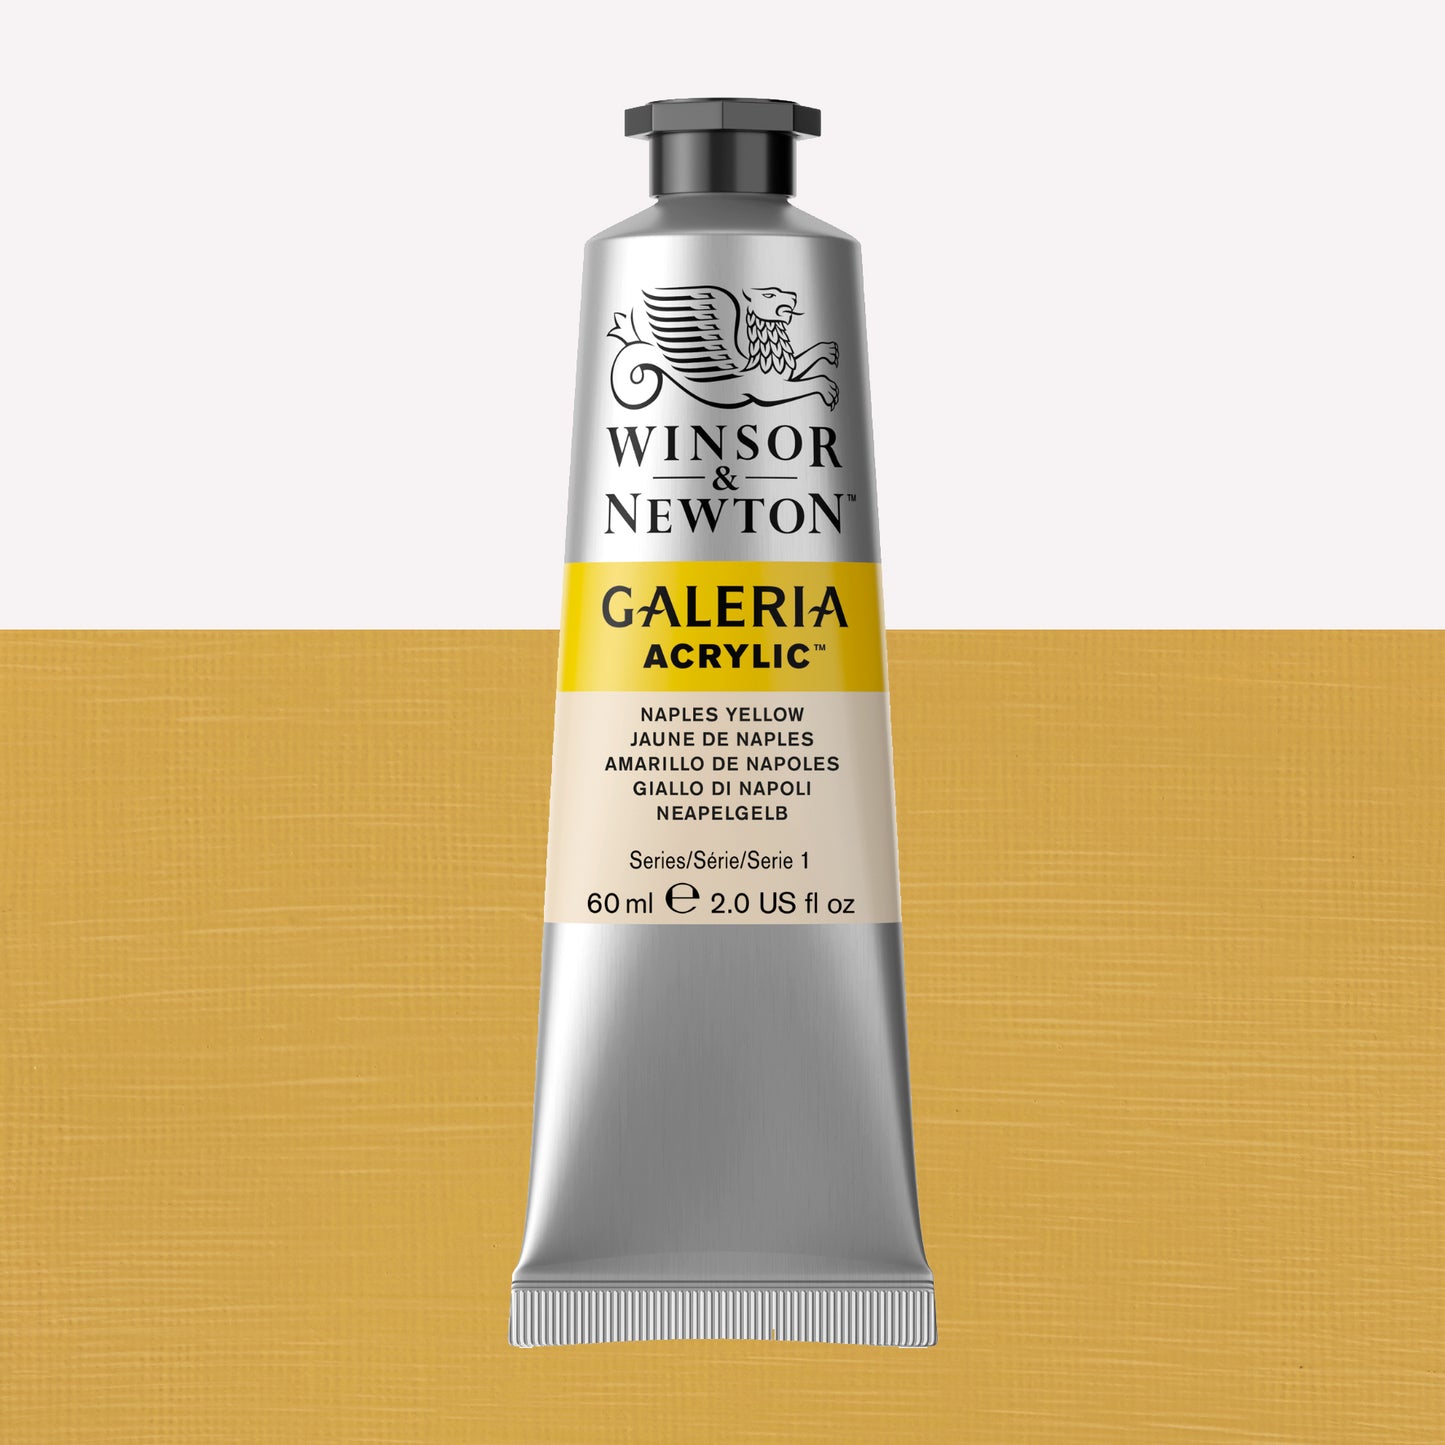 A 60ml tube of vibrant Galeria Acrylic paint in the shade Naples Yellow. This professional-quality paint is packaged in a silver tube with a black lid. Made by Winsor and Newton.